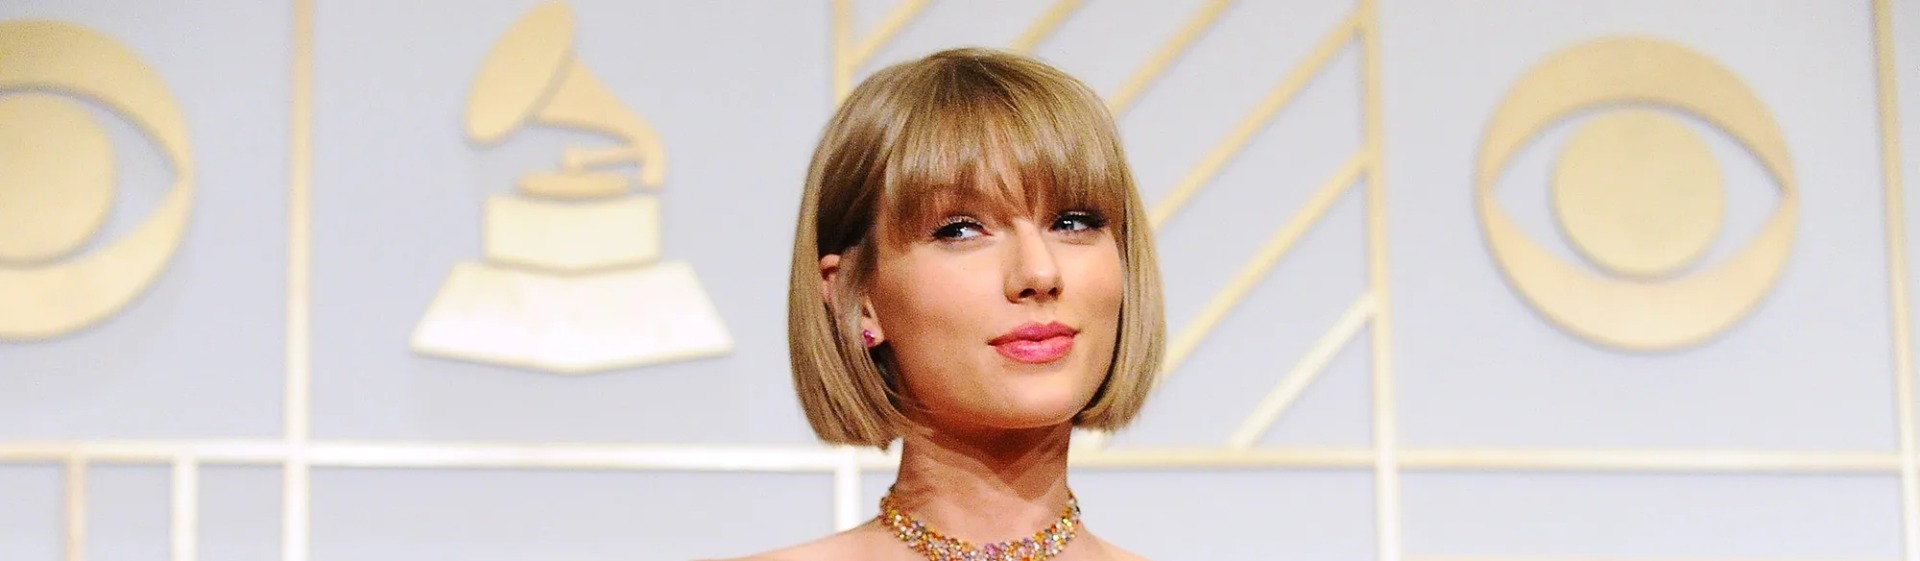 Taylor Swift Sparks 588% Search Increase for Dead Poets Society